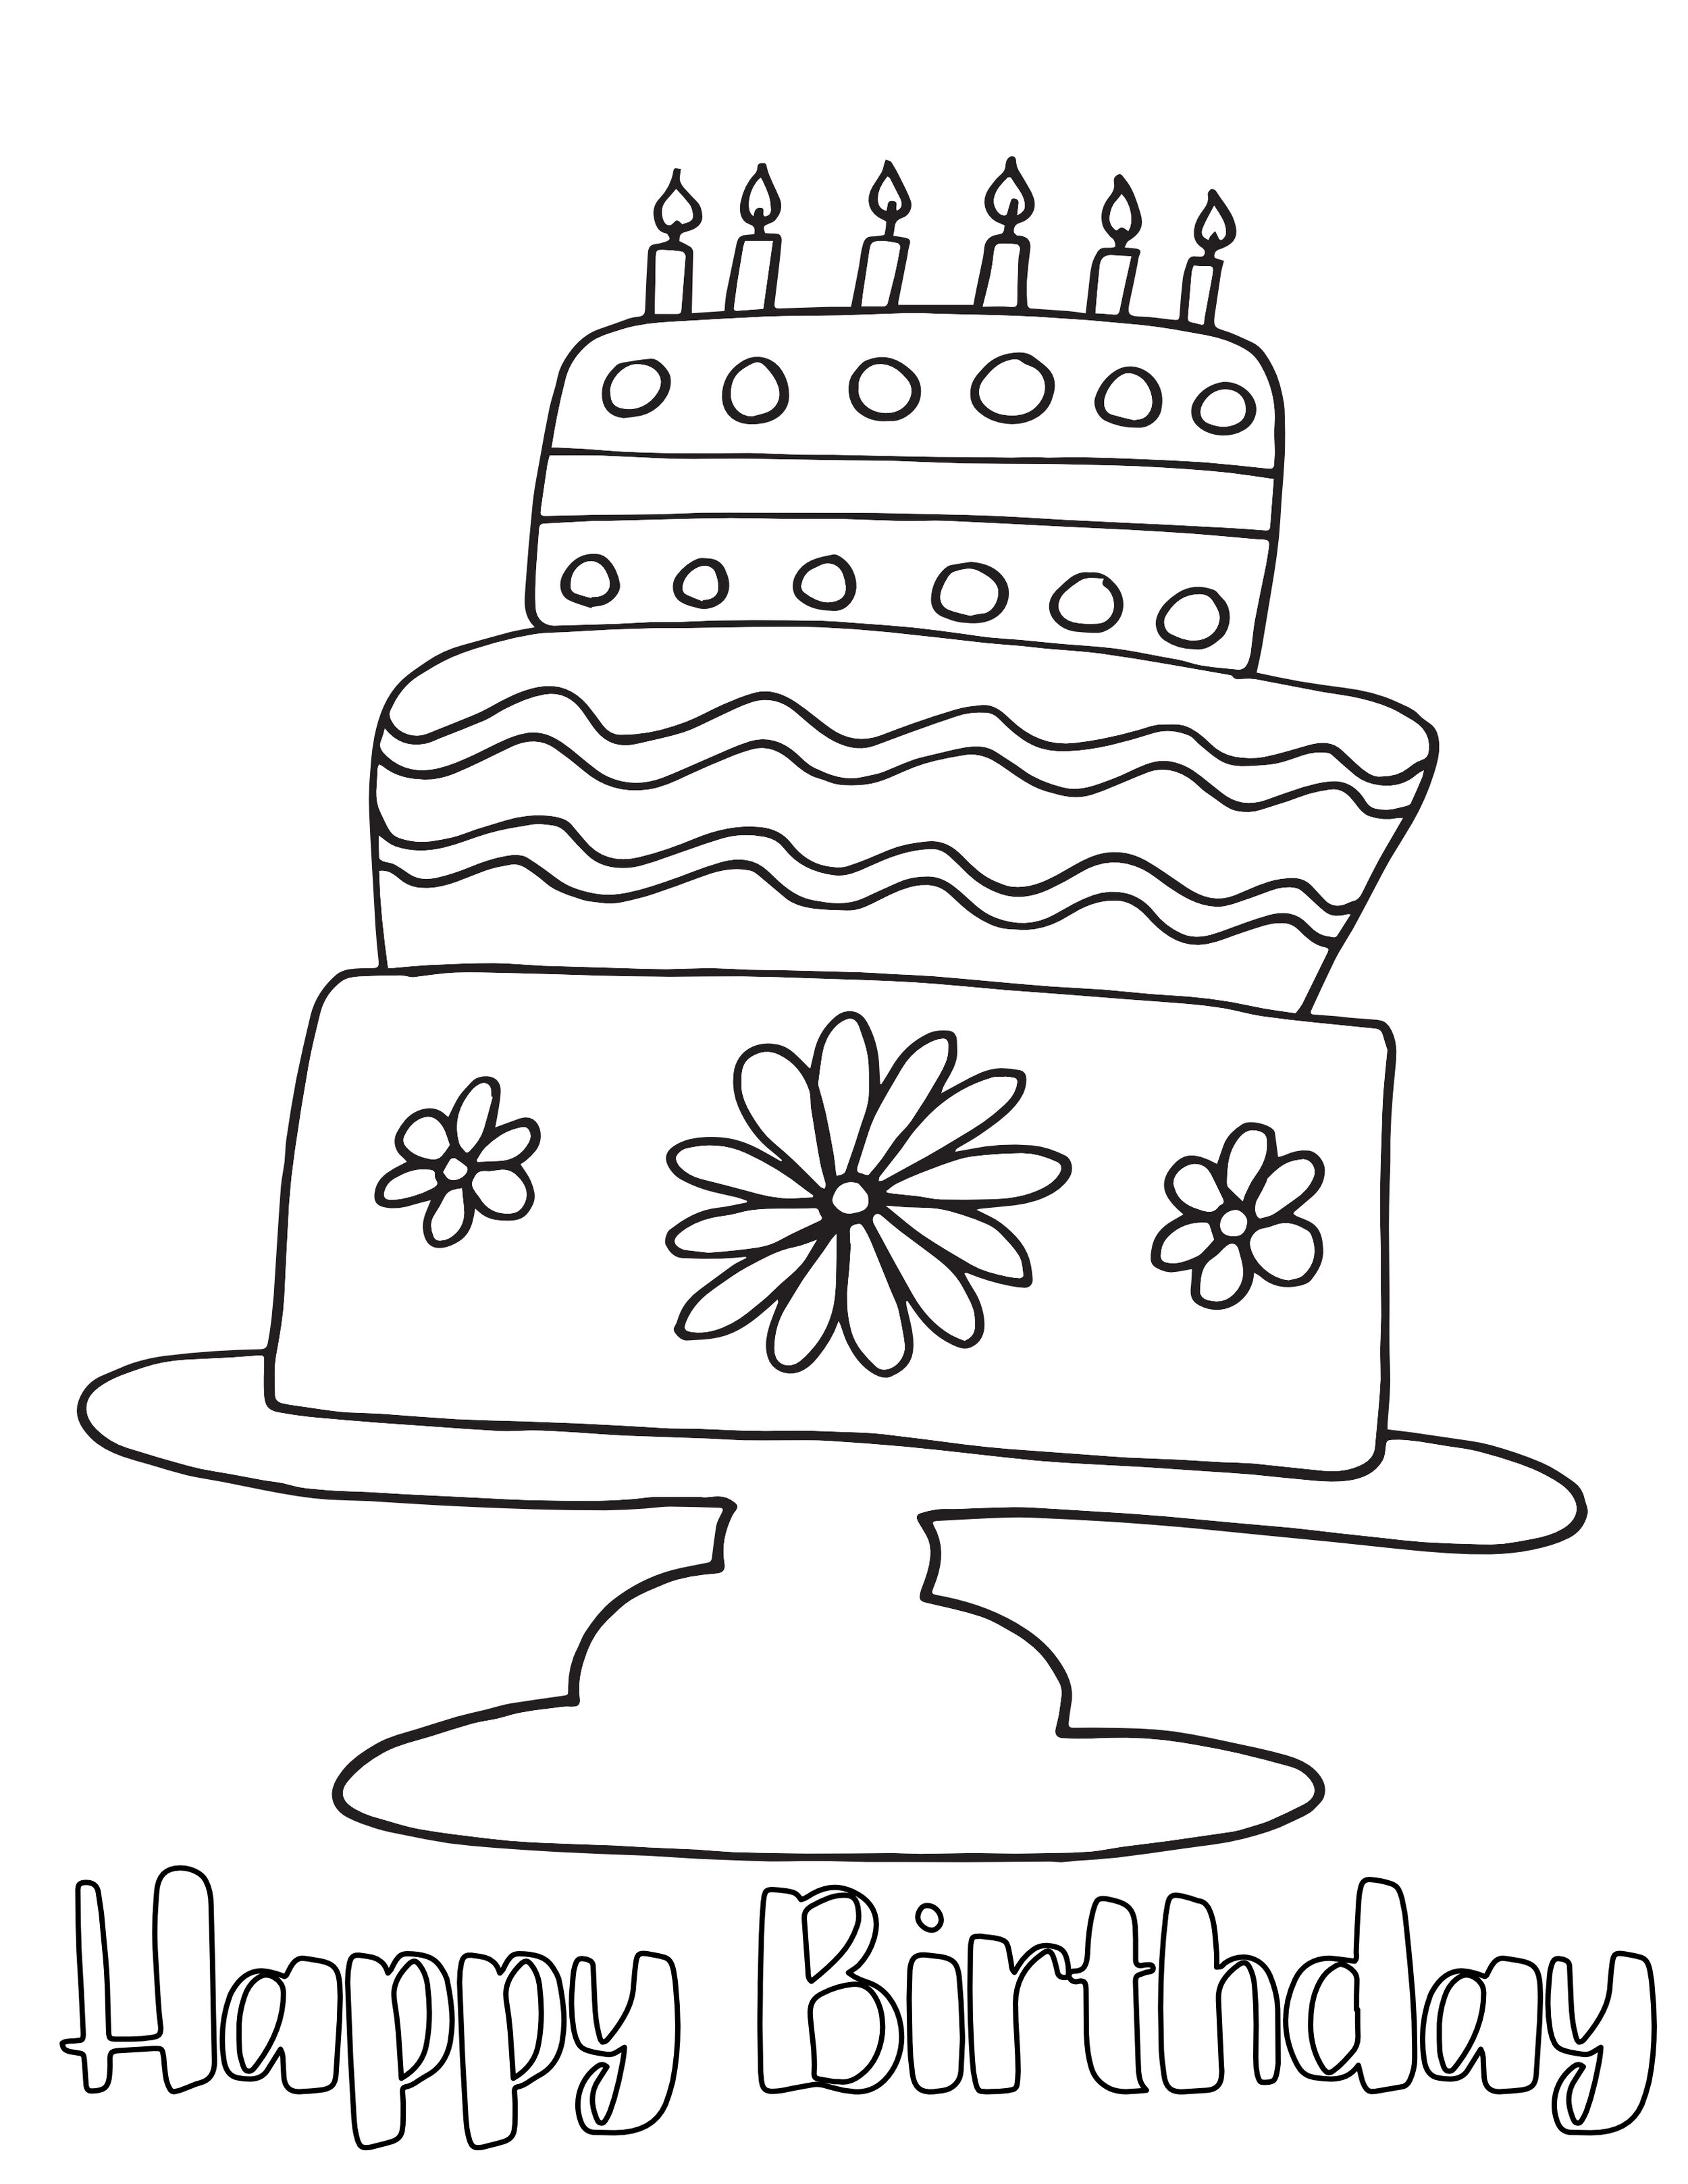 HAPPY BIRTHDAY CAKE - Free Coloring Page — Stevie Doodles